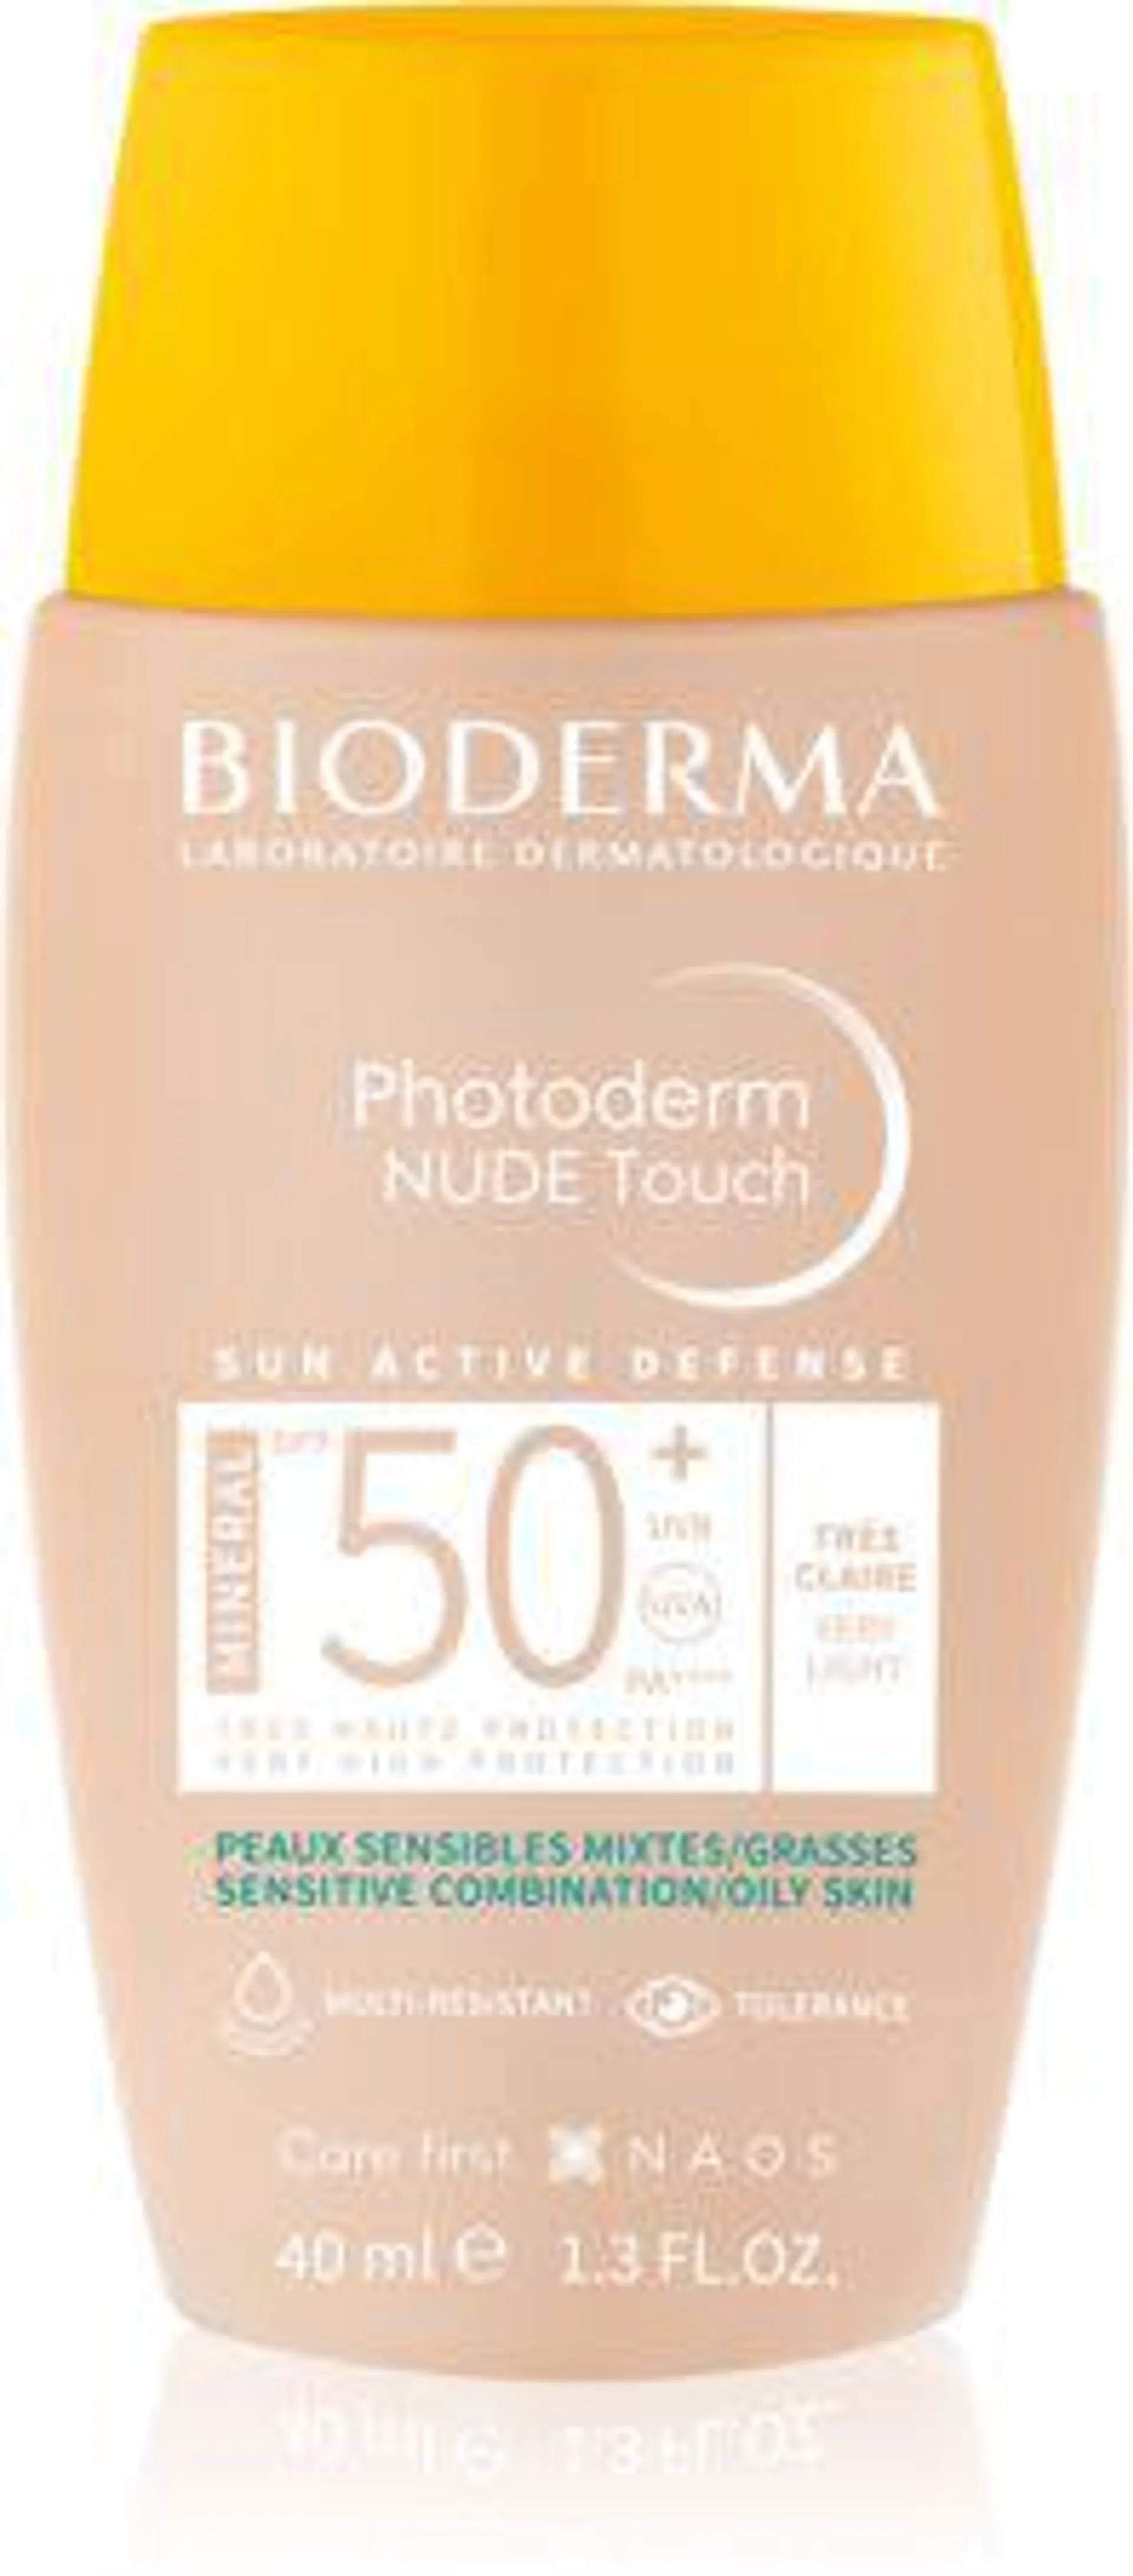 Photoderm Nude Touch